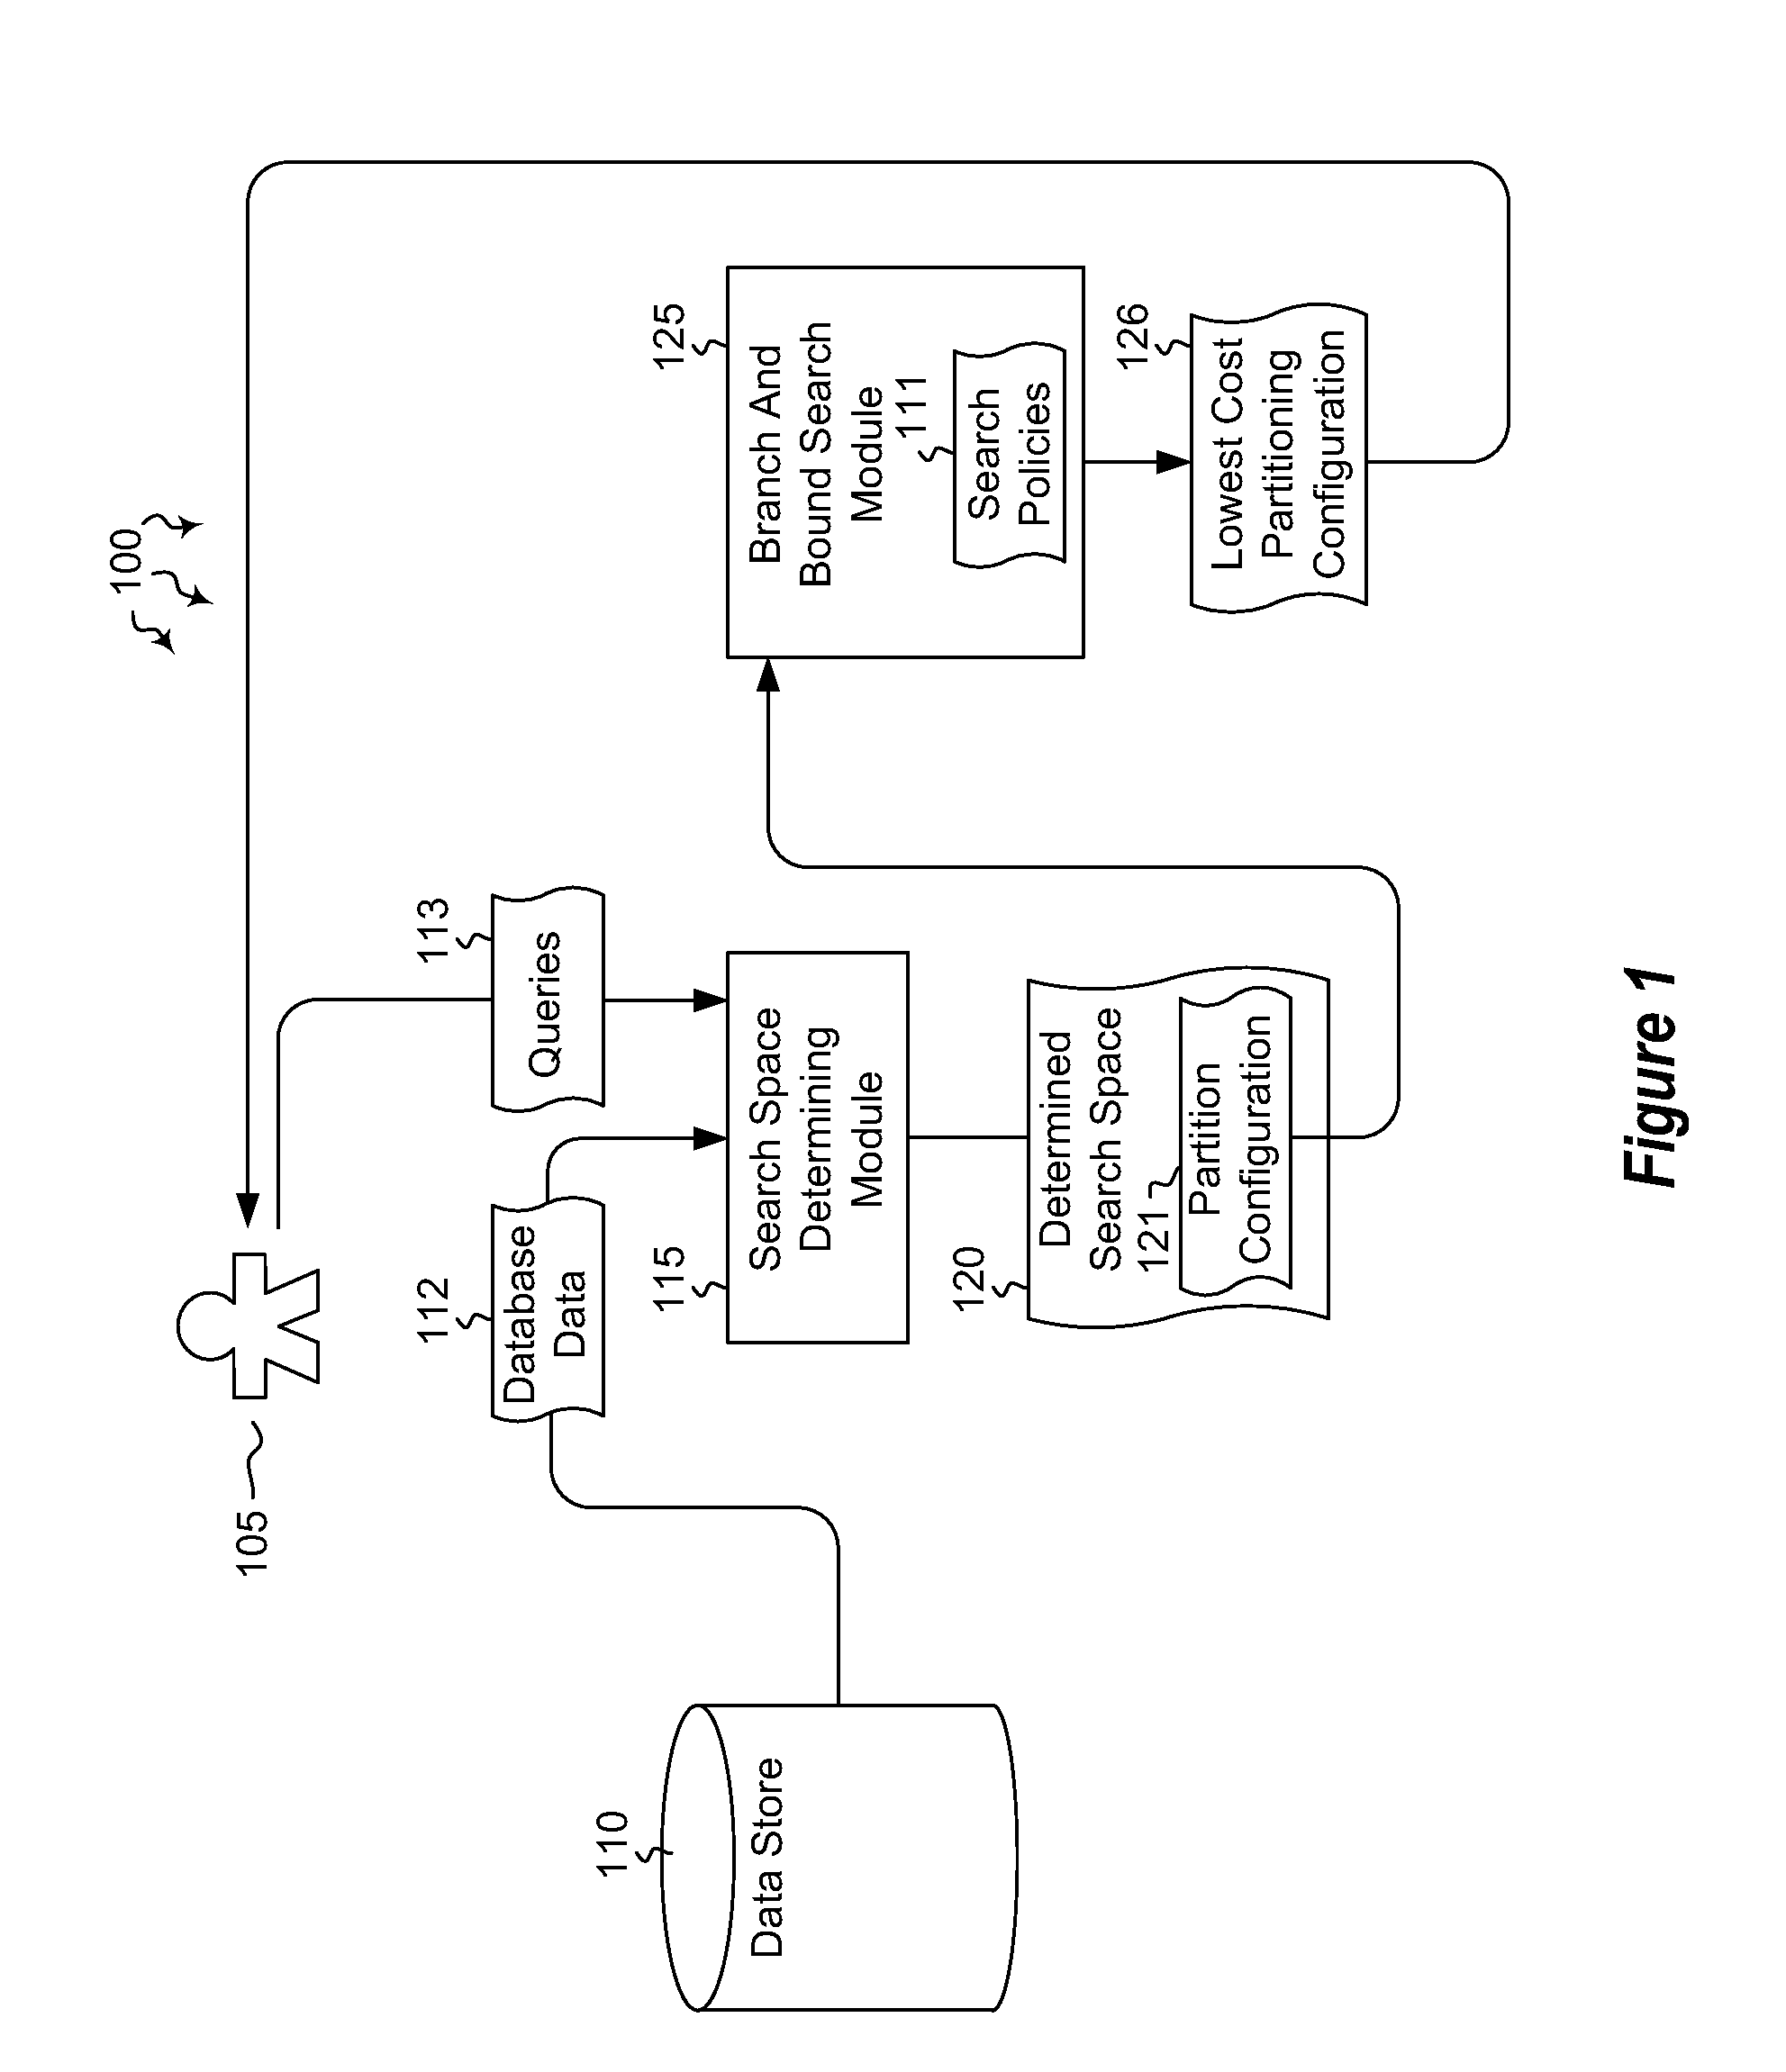 Automated partitioning in parallel database systems